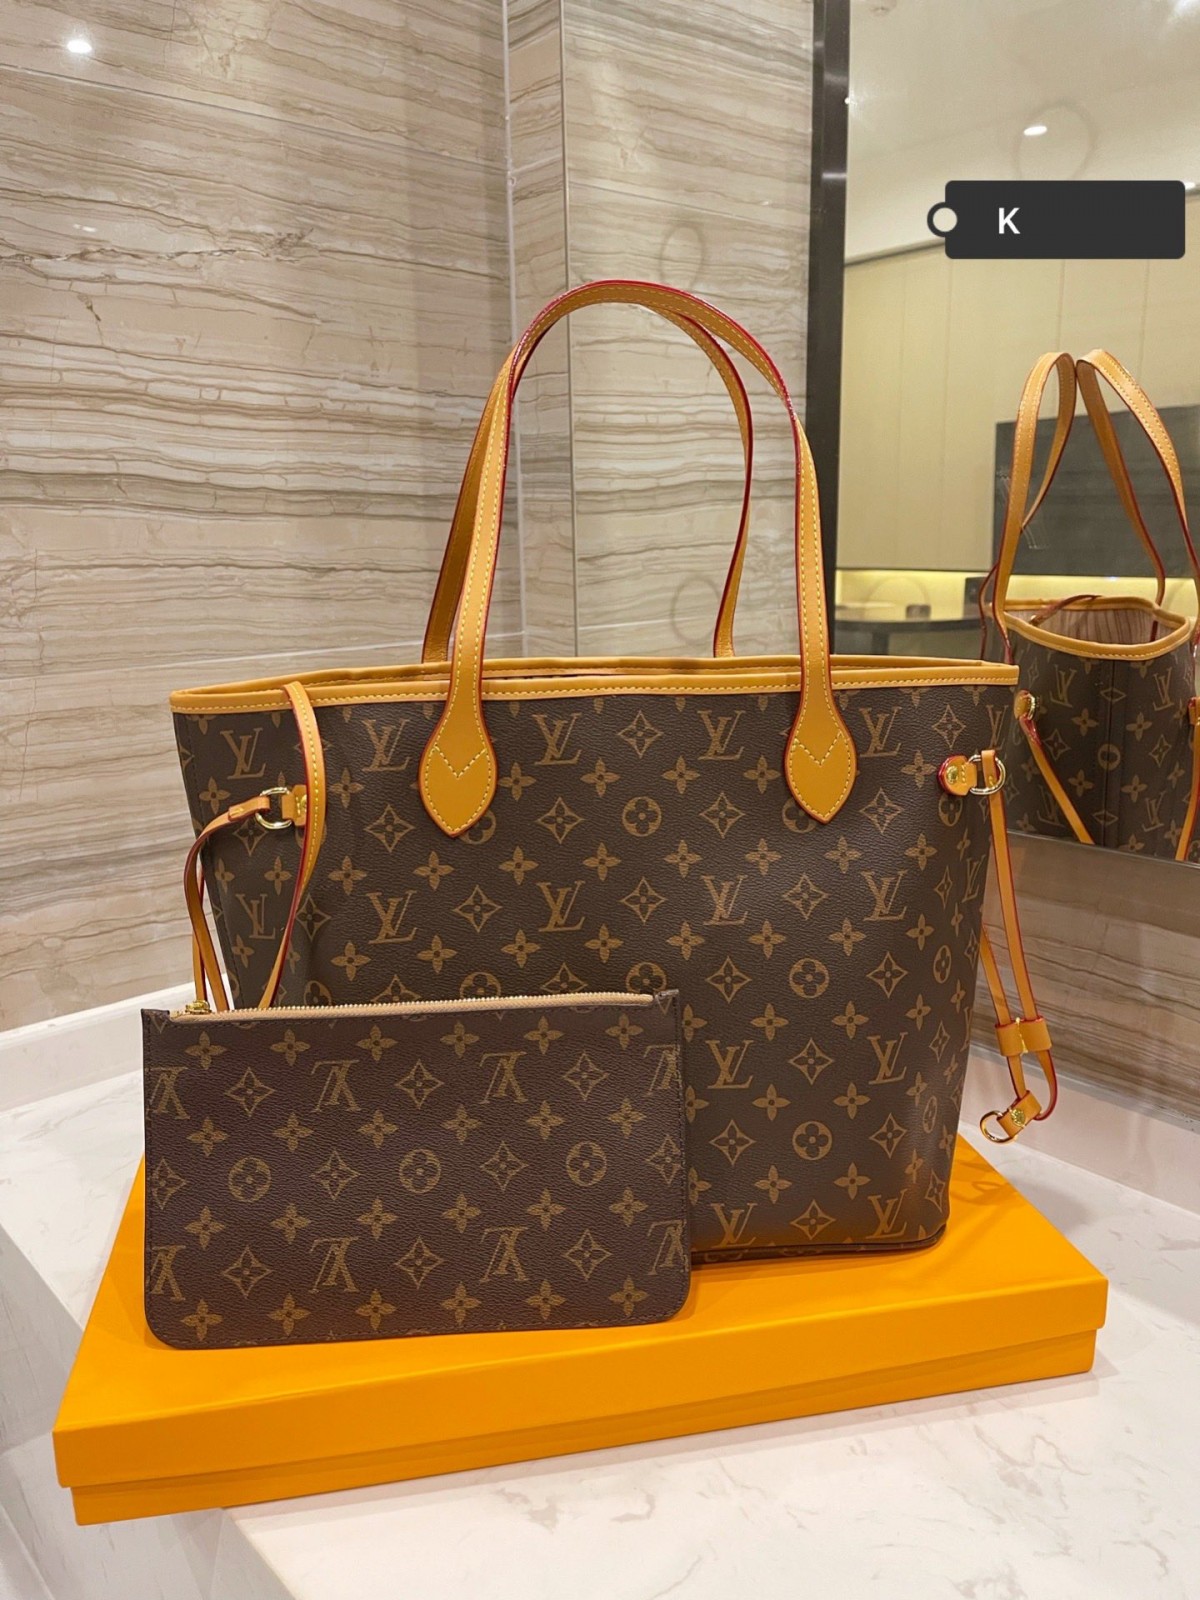 As one of Louis Vuitton’s classic replica bags Never full, the price is only $199? (2022 special)-Best Quality Fake Louis Vuitton Bag Online Store, Replica designer bag ru